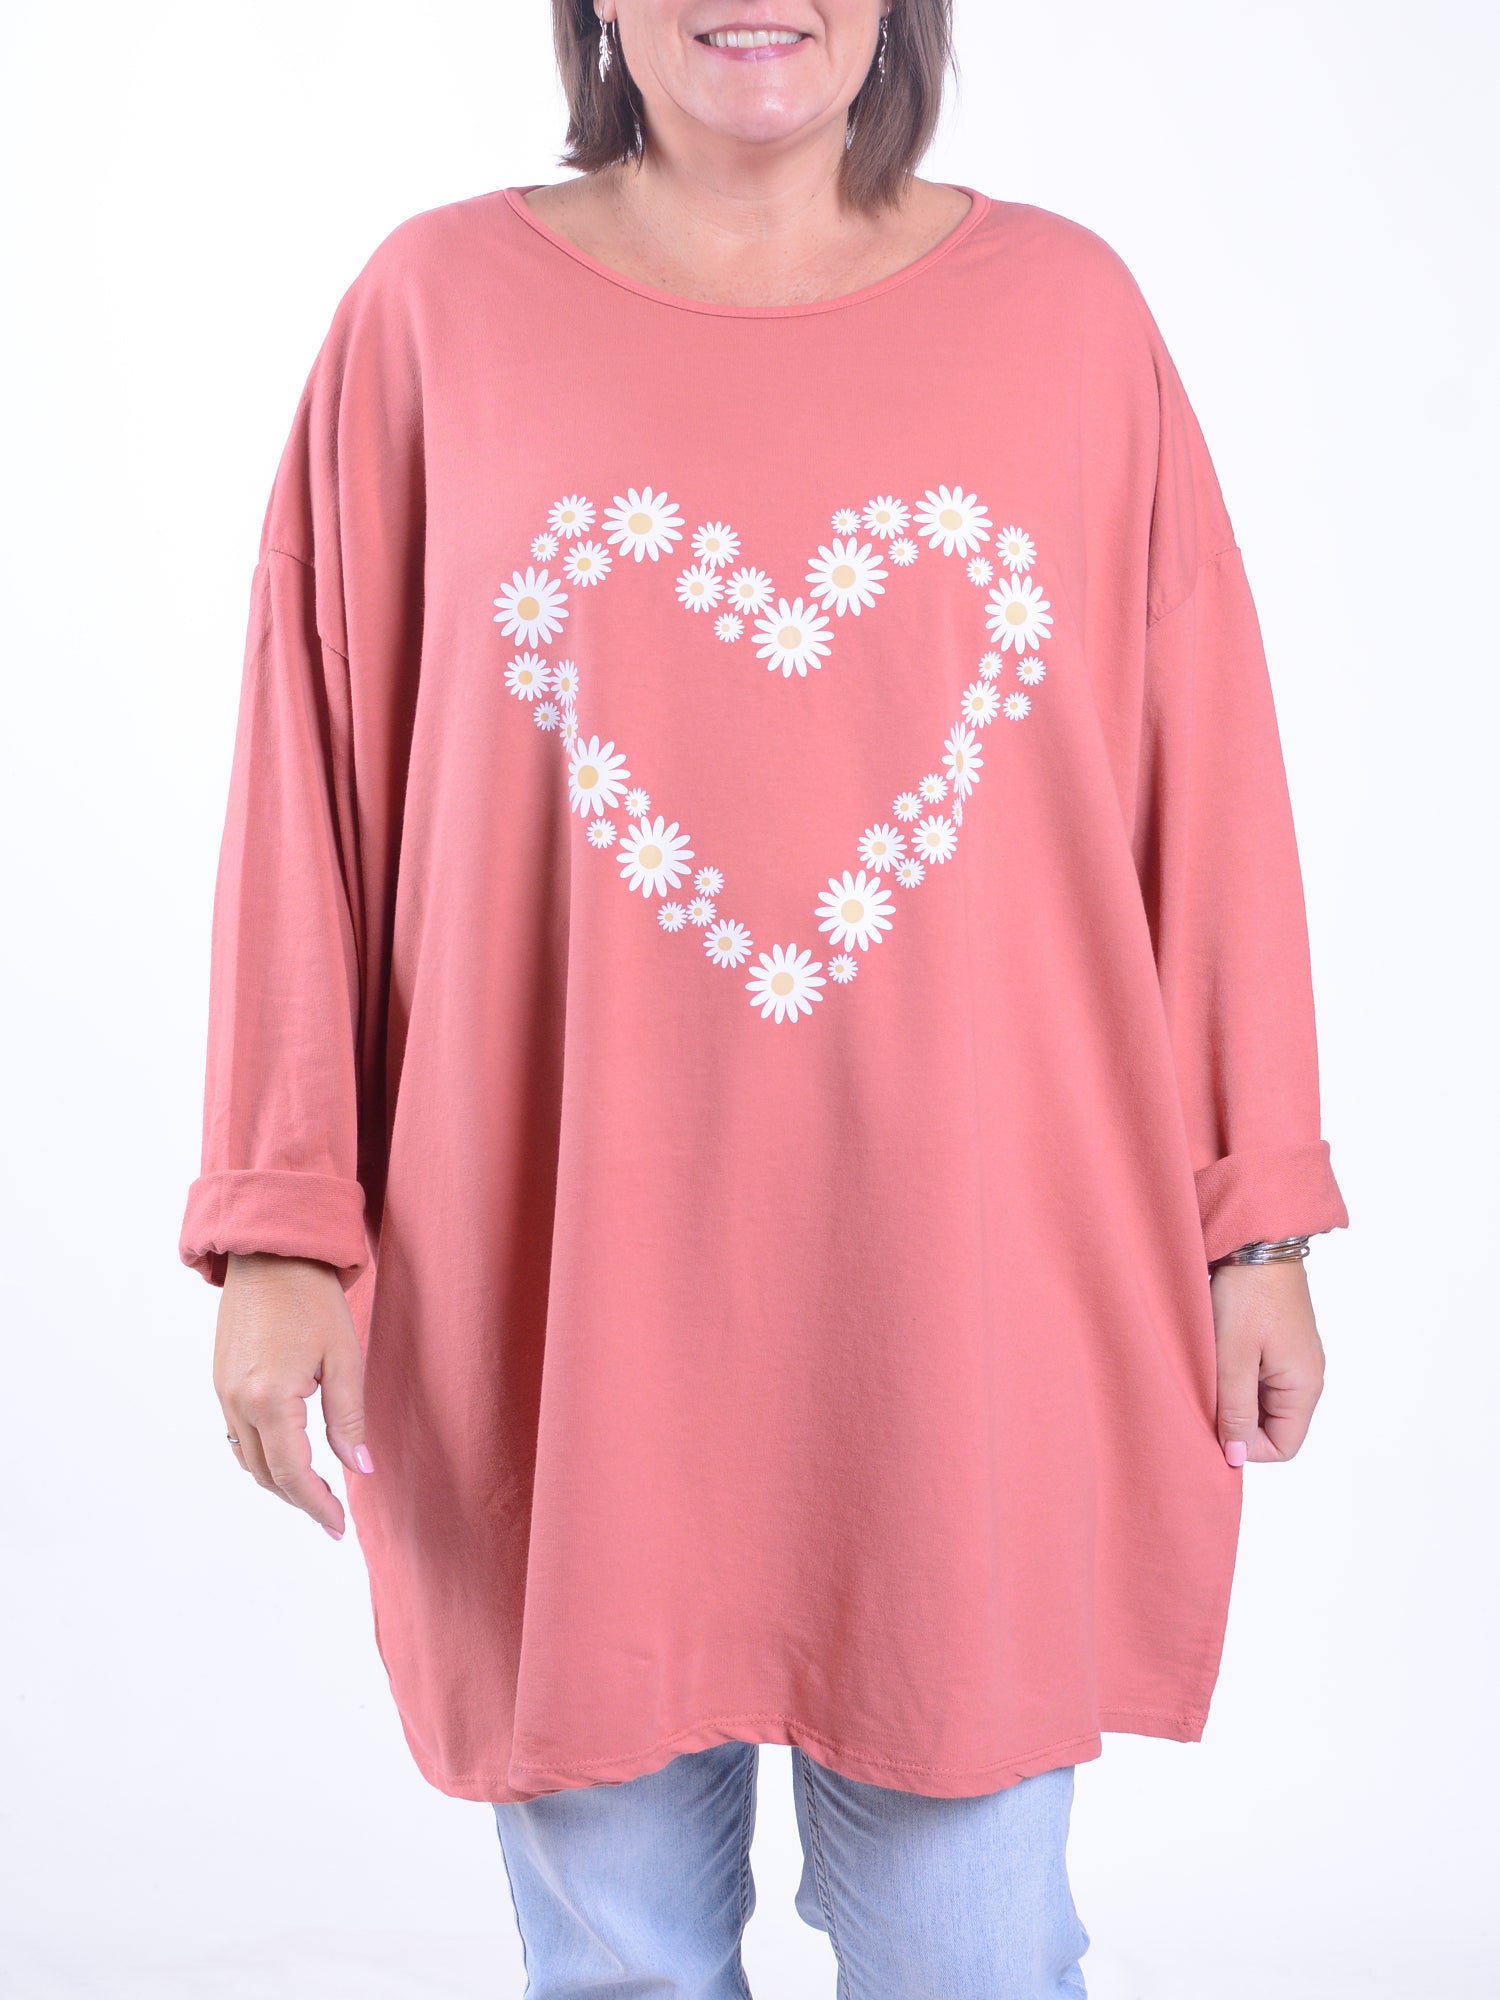 Daisy Heart Top - 9482DH, Tops & Shirts, Pure Plus Clothing, Lagenlook Clothing, Plus Size Fashion, Over 50 Fashion